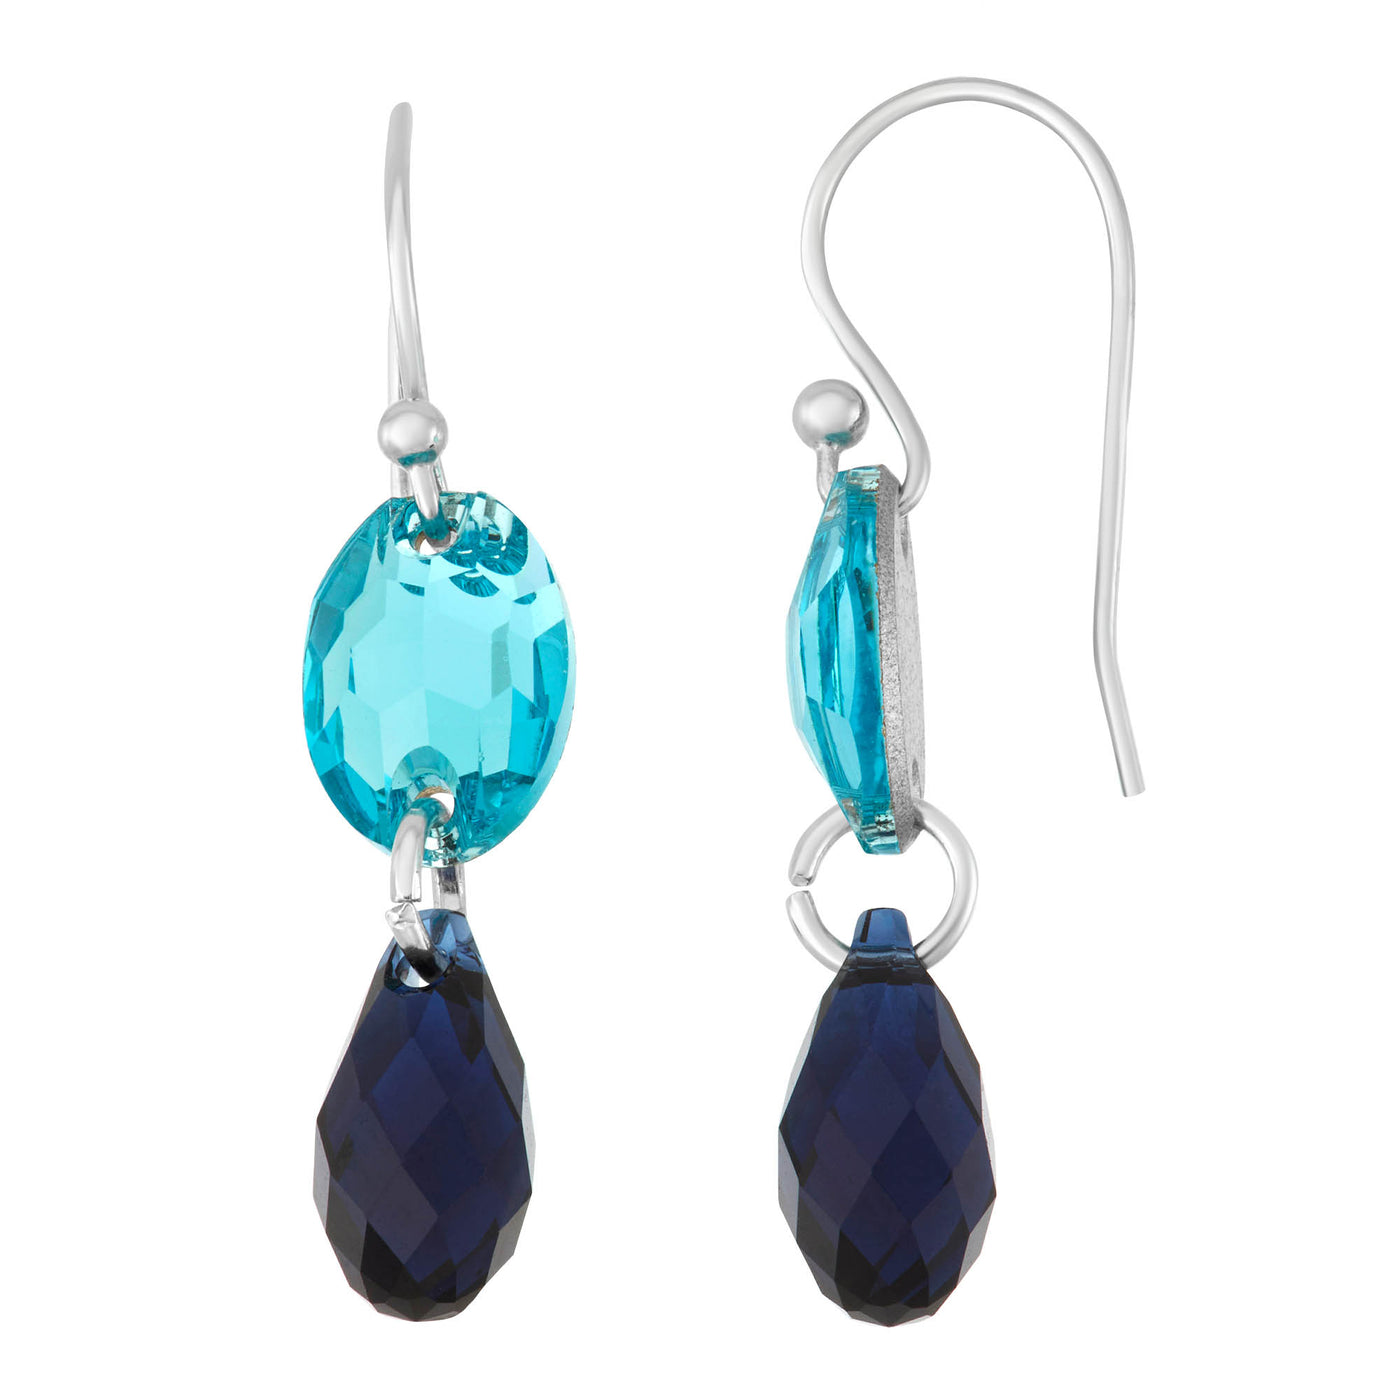 Rebecca Sloane Silver Oval Tear Drop Earring With Indigo Crystals